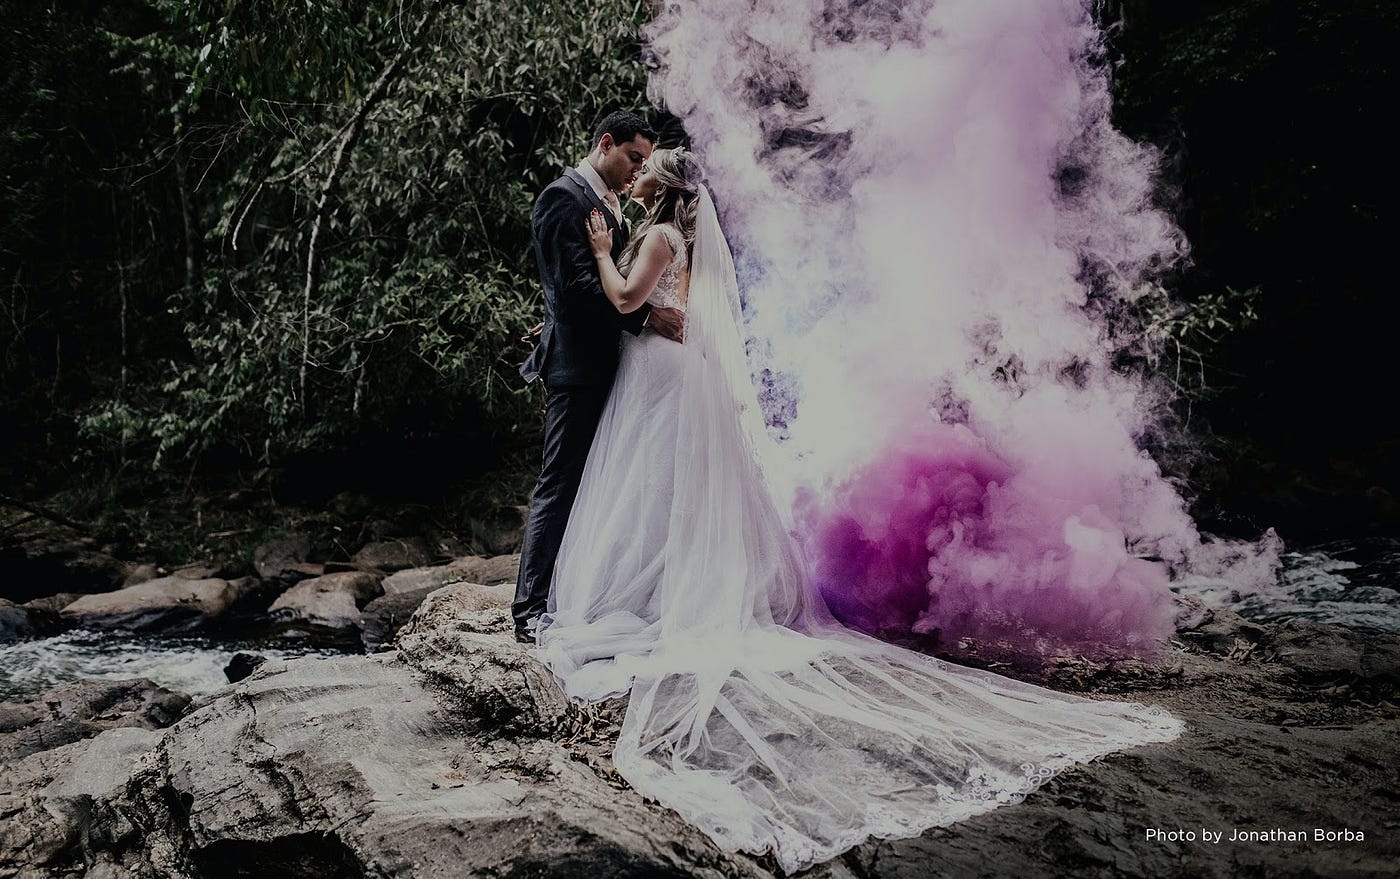 Smoke Bomb Wedding Photography: What You Need to Know.